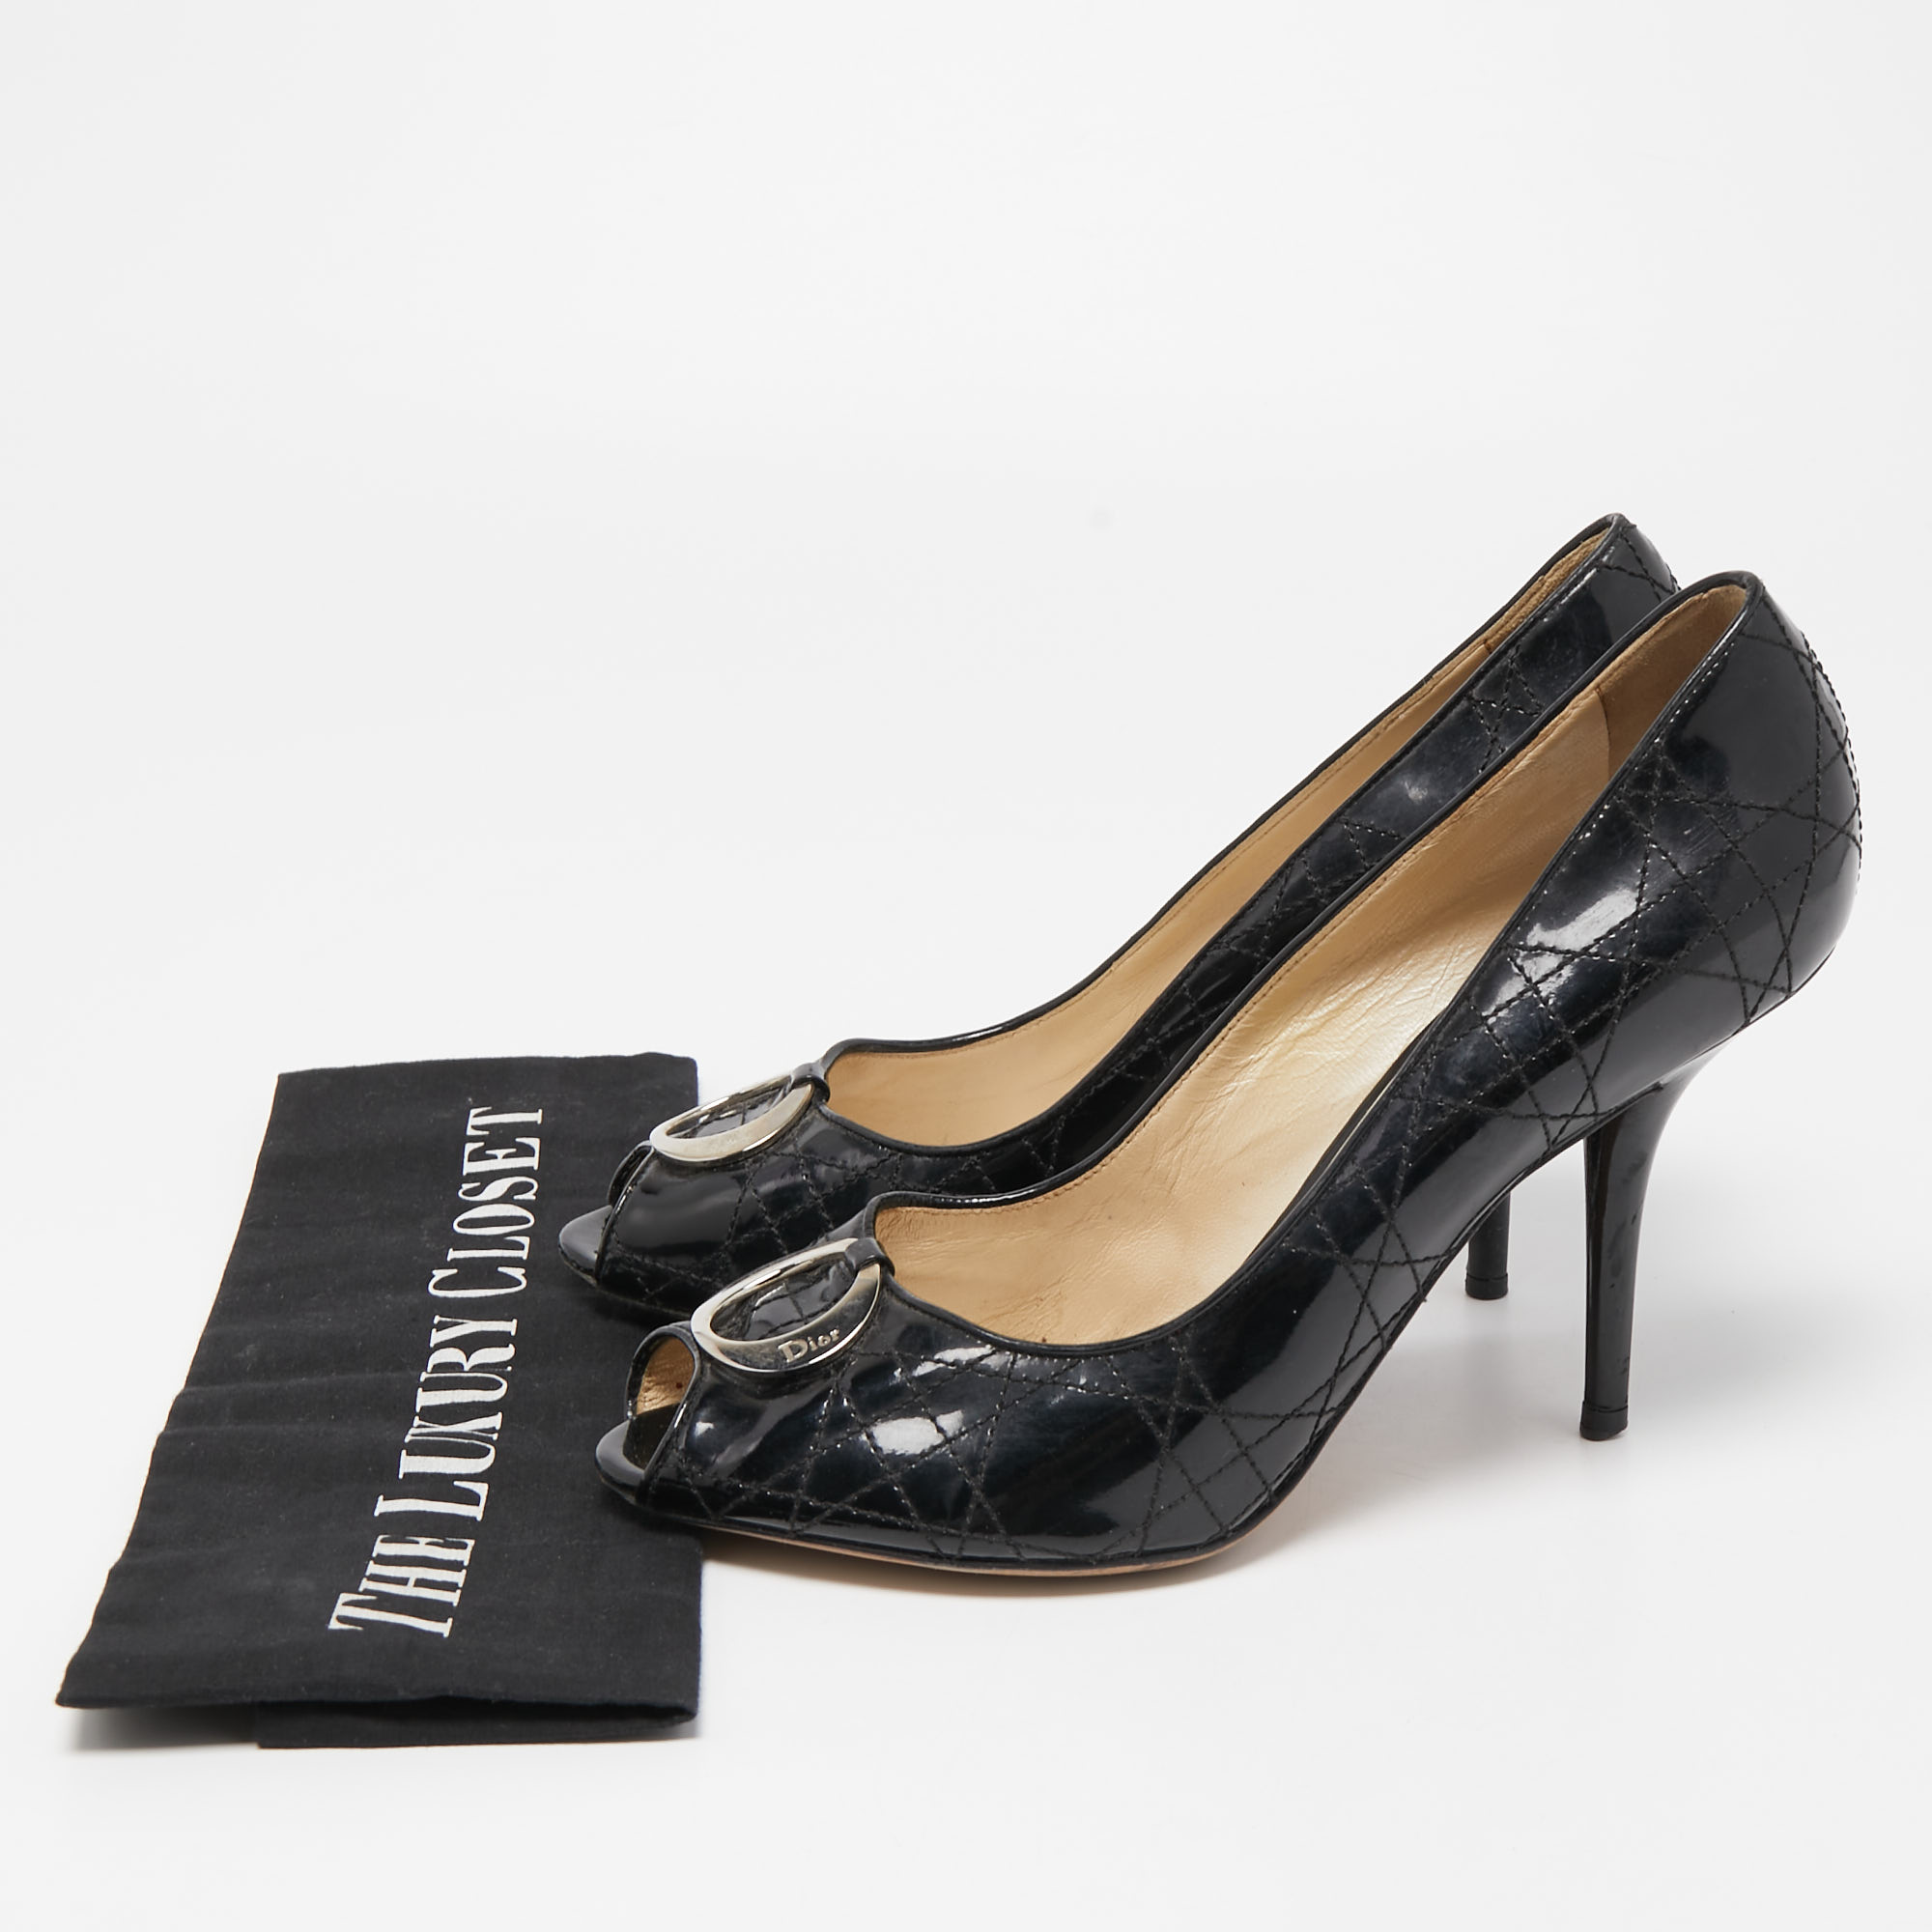 Dior Black Cannage Patent Leather Peep Toe Pumps Size 39.5